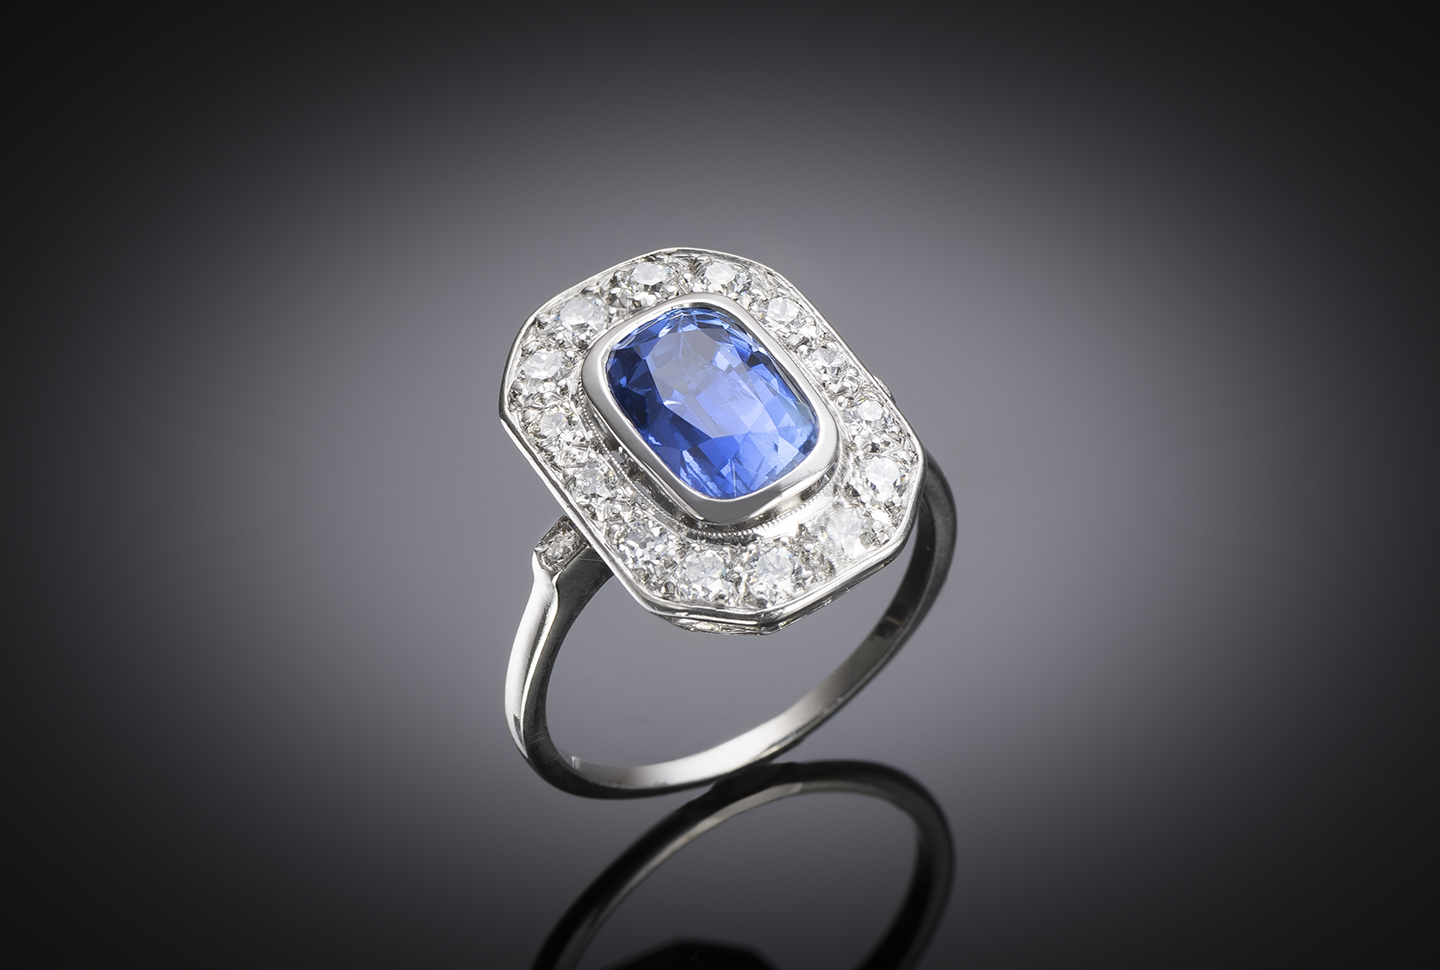 French Art deco ring circa 1935, Glannes R. former Maison Duran, natural sapphire (4 carats, laboratory certificate) and diamonds-1